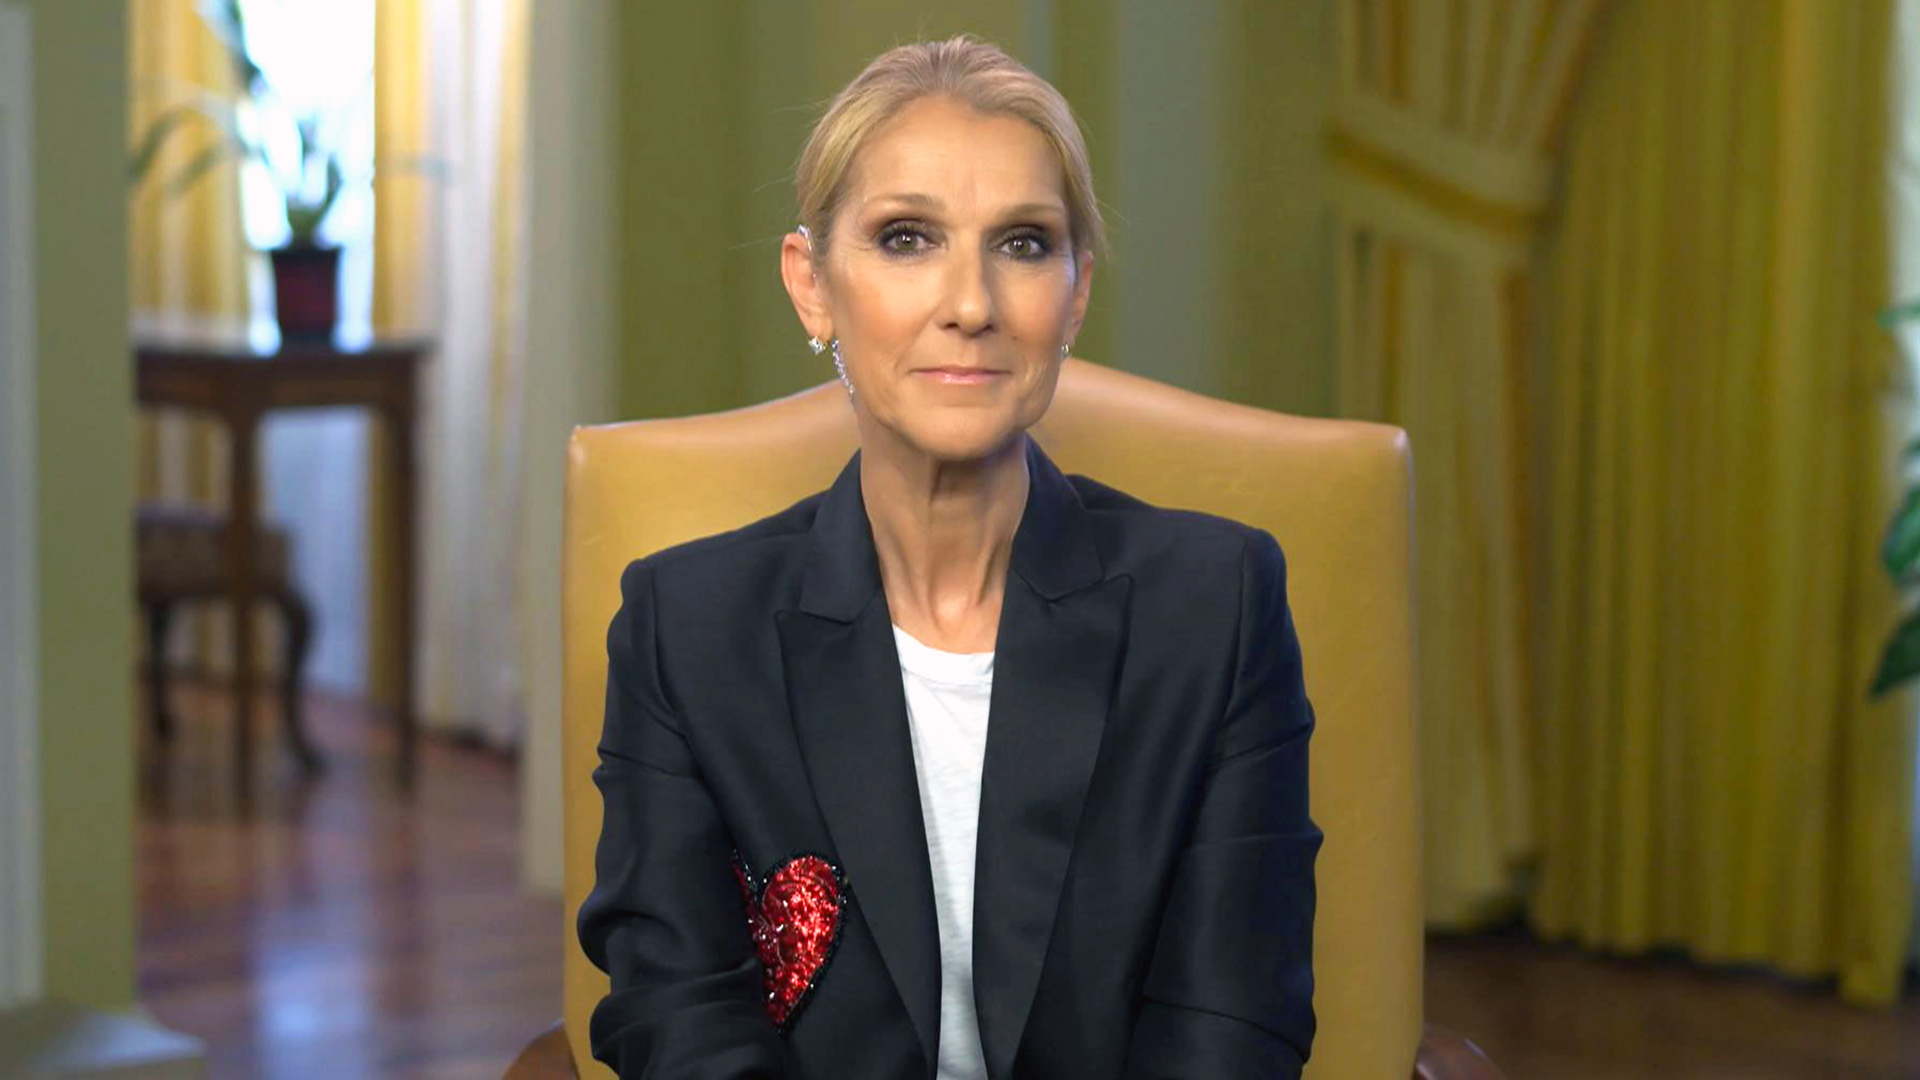 Celine Dion on residency, the loss her husband